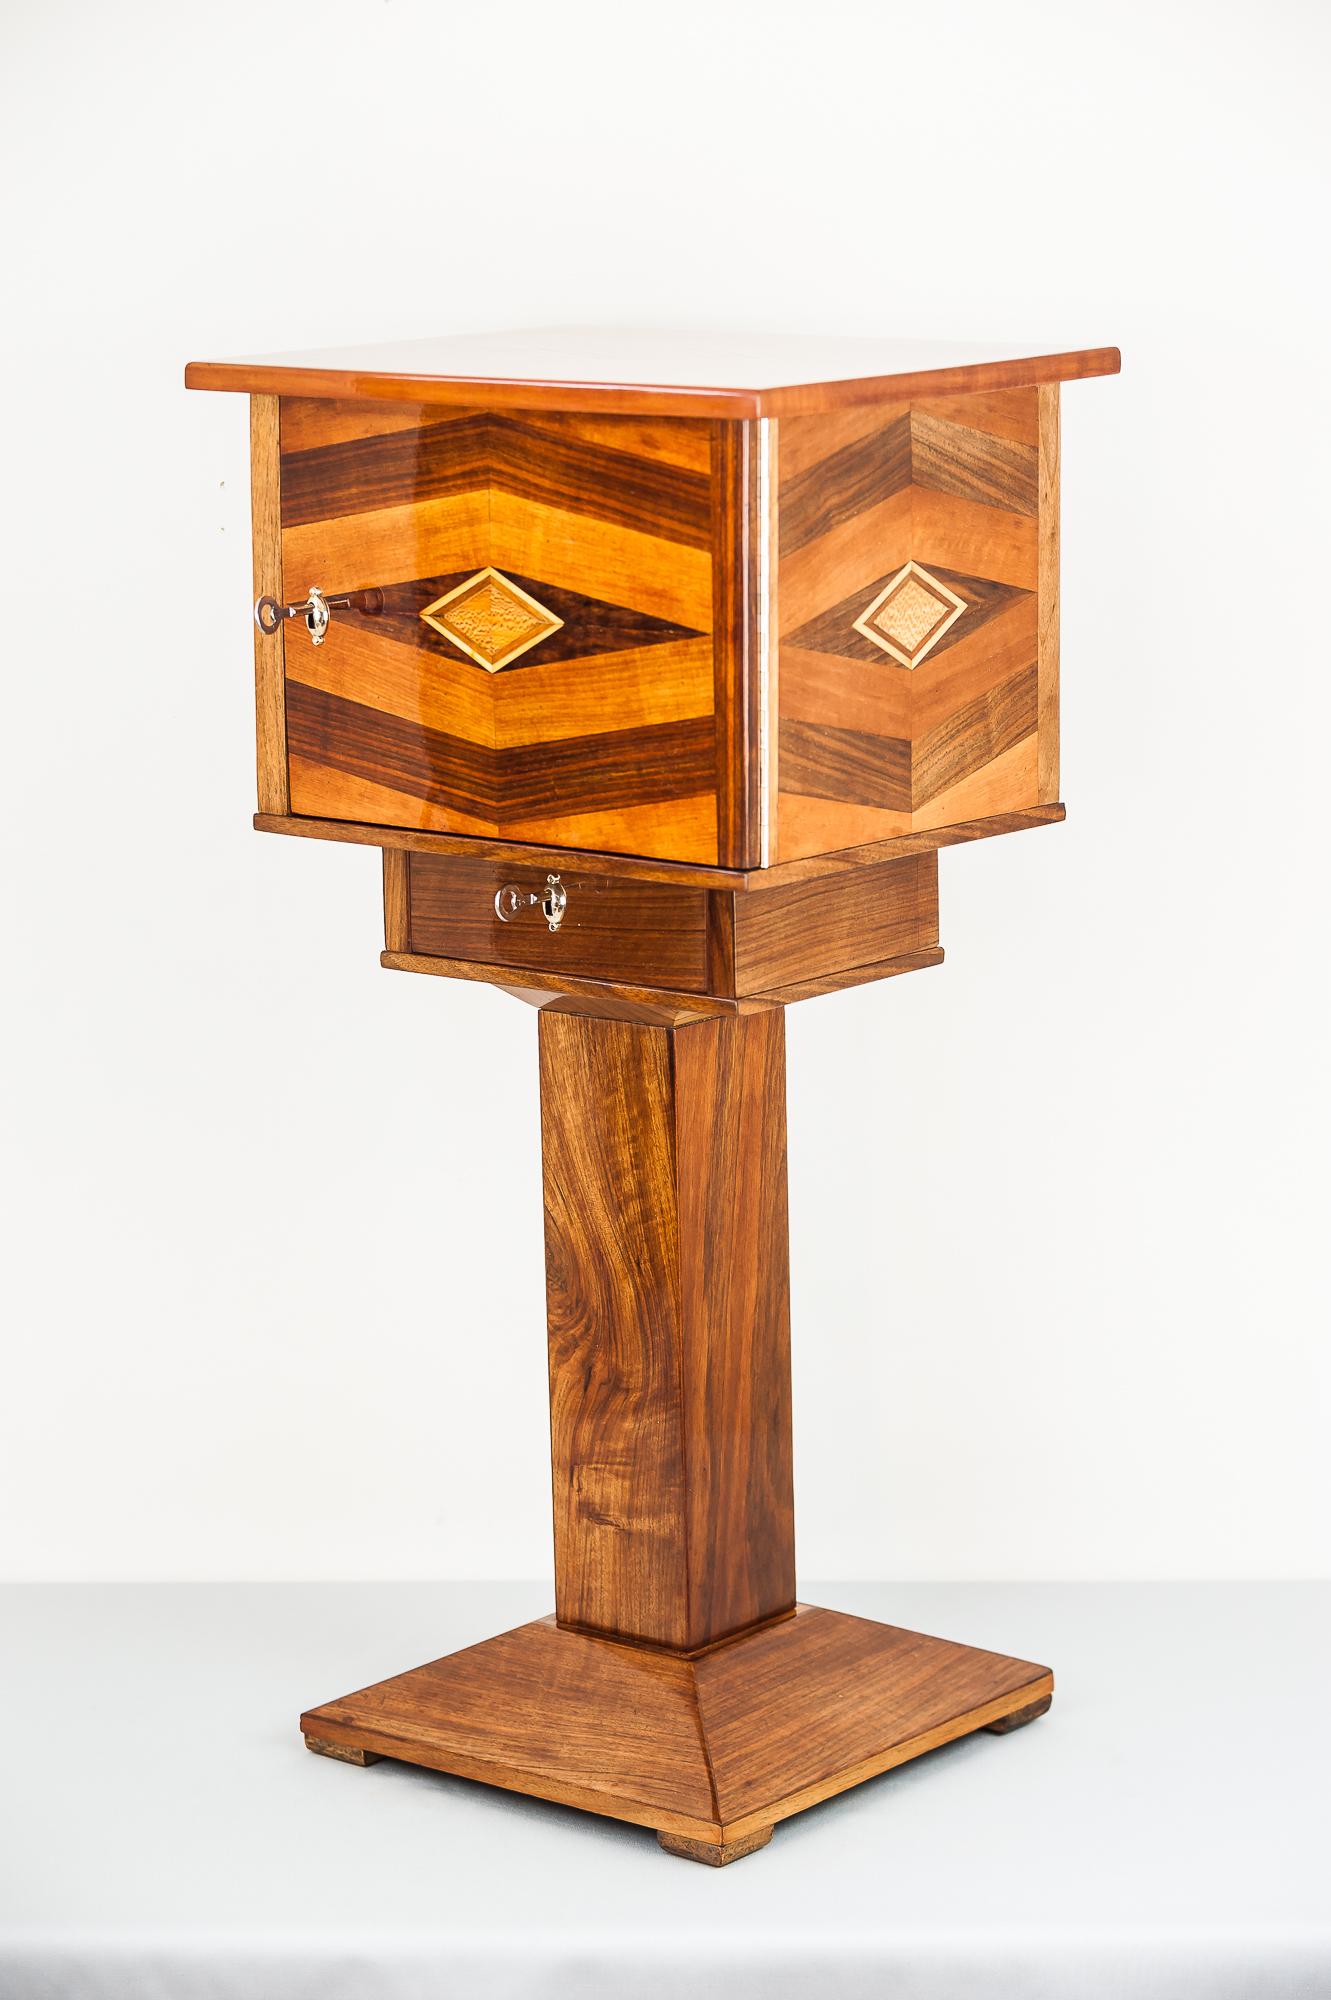 Art Deco table with 4 drawers execution in polished nut wood with inlay, 1920s.
 